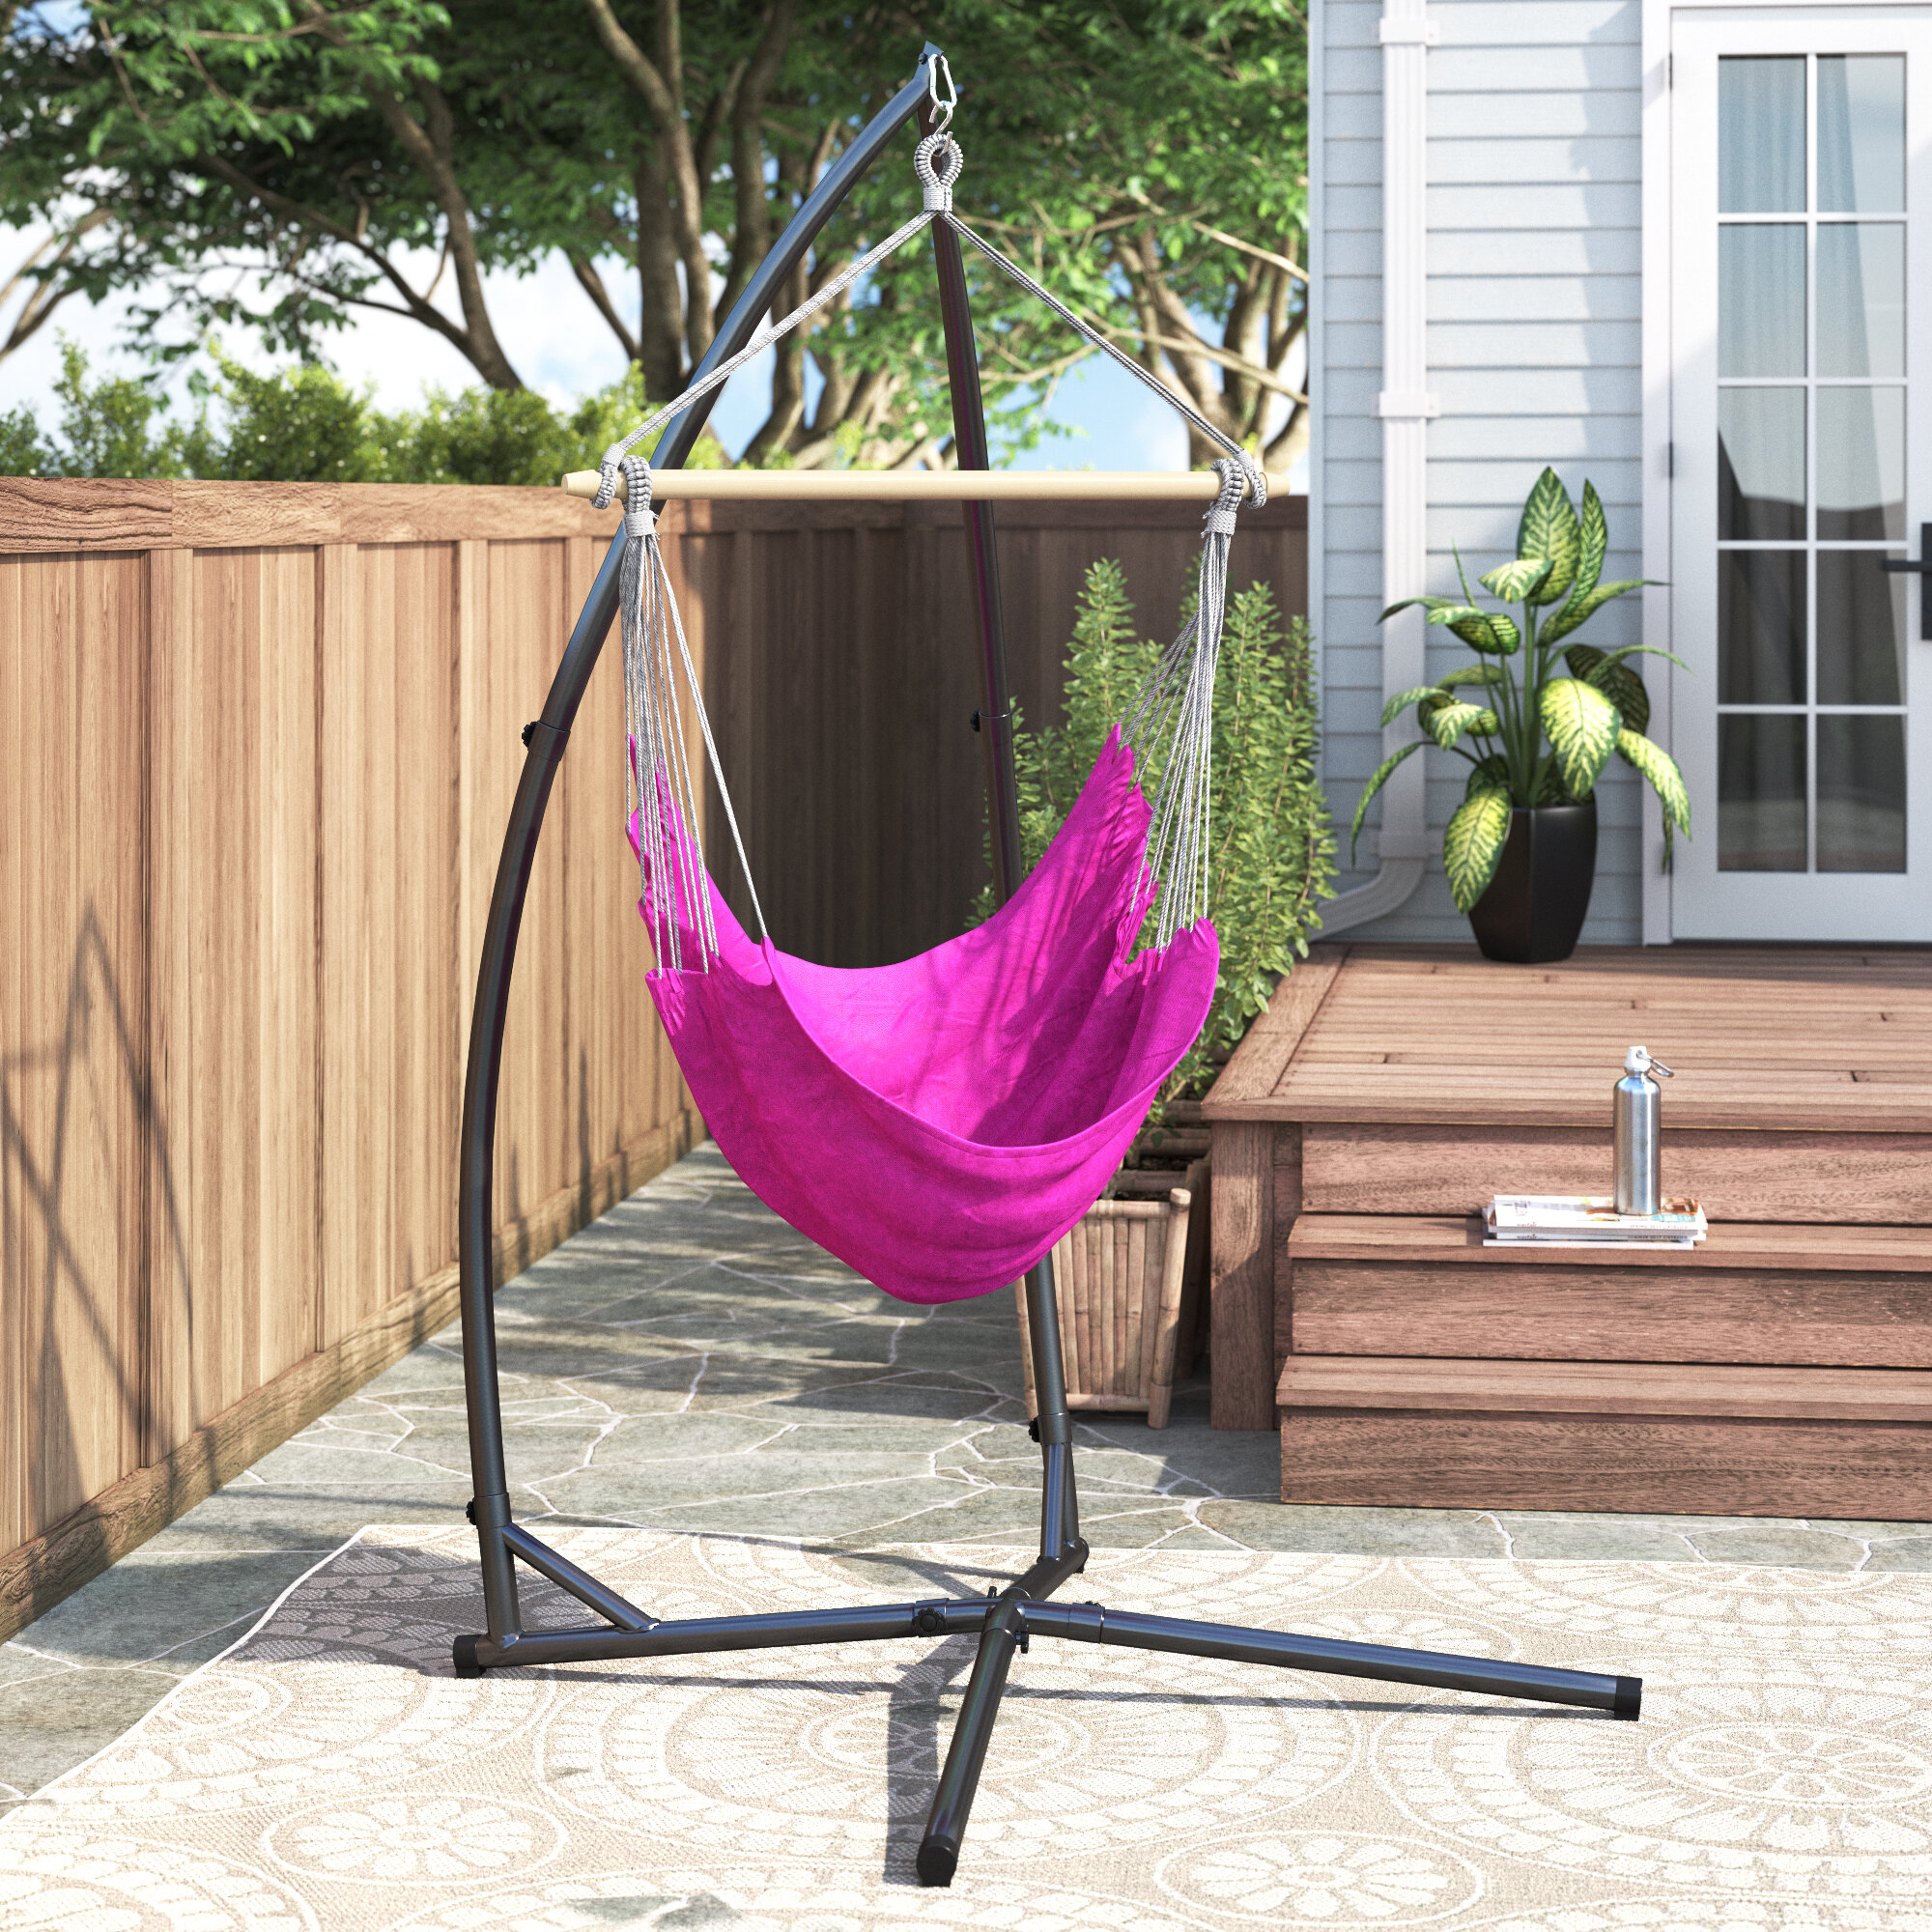 Sunnydaze Hammock Chair Stand Only Metal C-Stand for Hanging Hammock Chair Indoor or Outdoor Use Durable 300-Pound Capacity Black